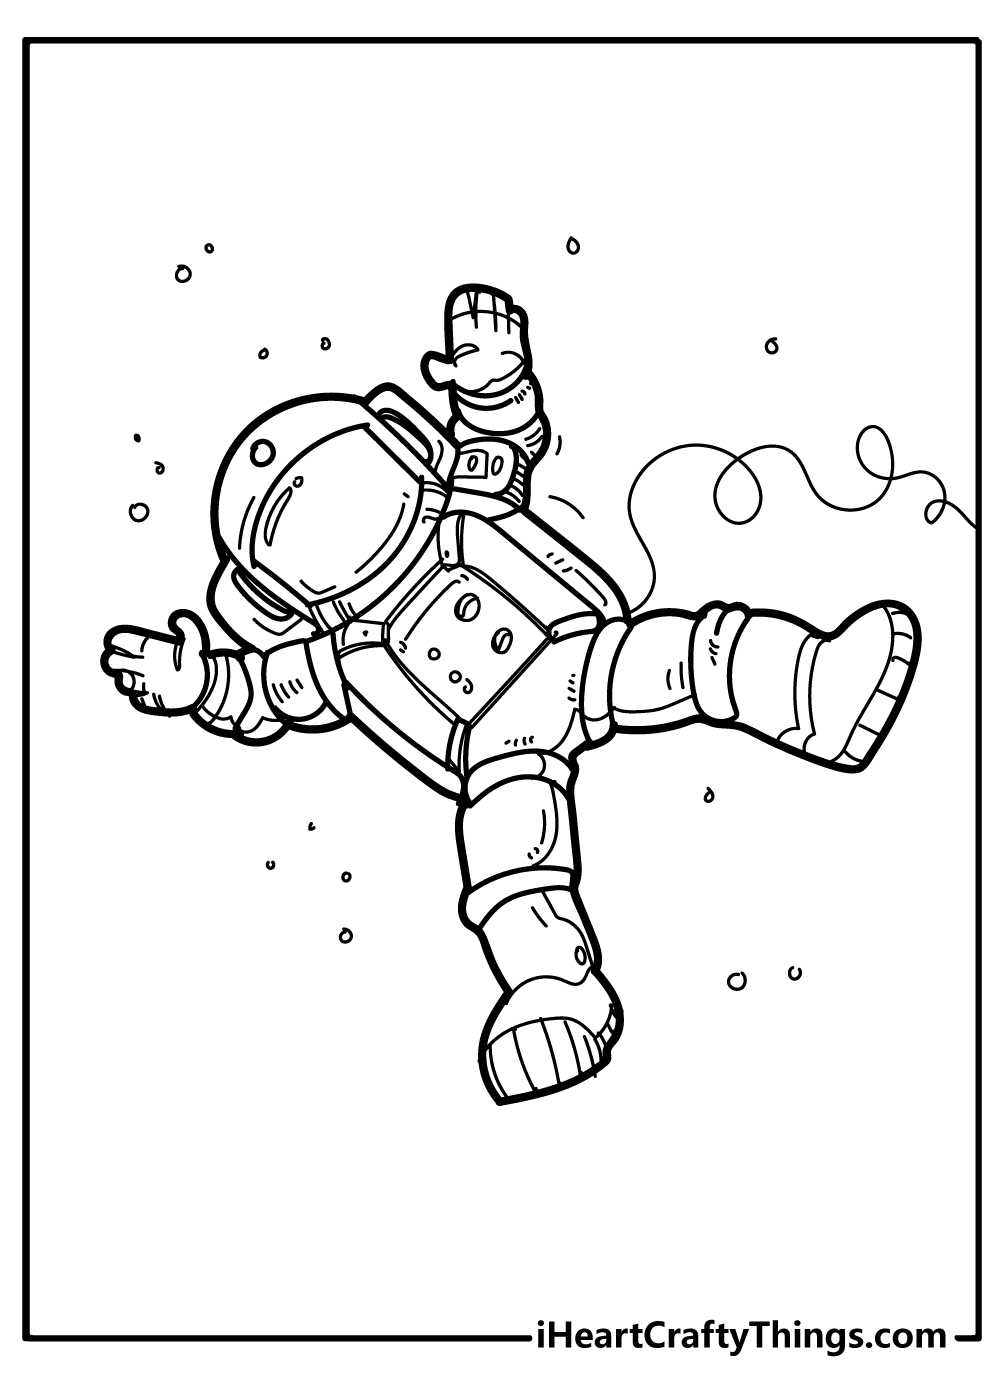 Printable Astronaut Coloring Pages Updated 20